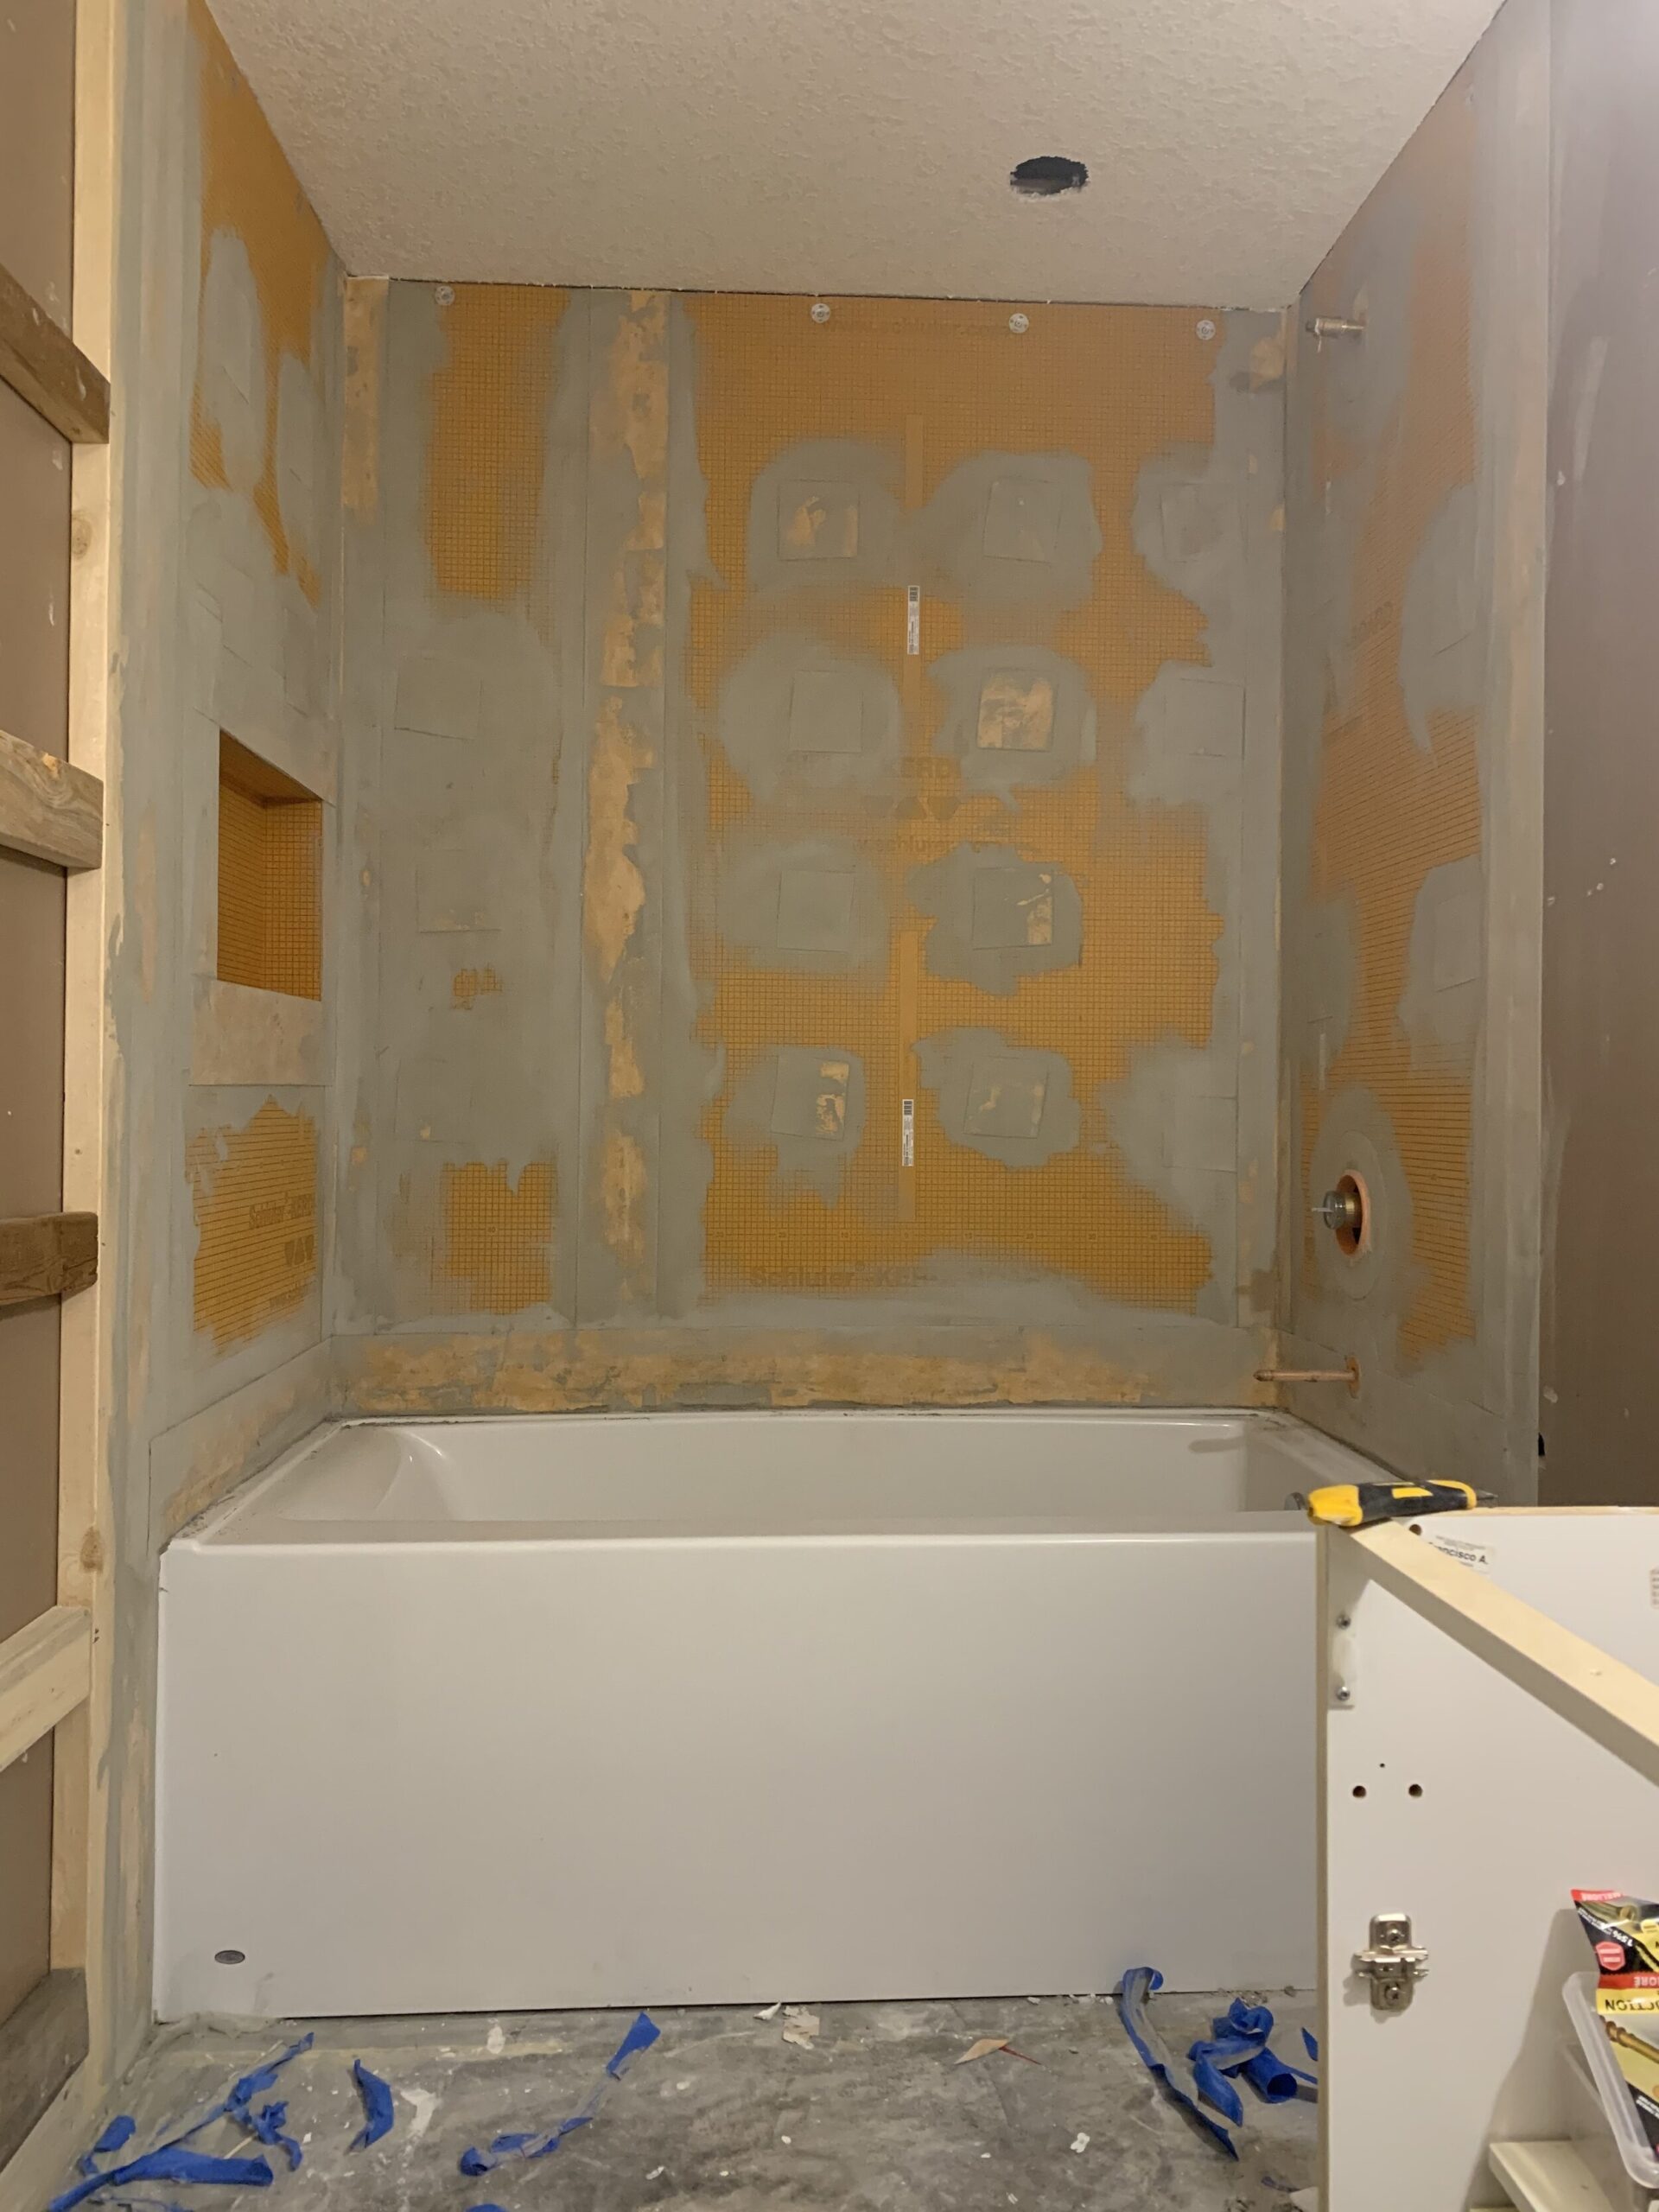 One Room Challenge Spring 2021 –  Week 2 – How to Waterproof a Tub Surround